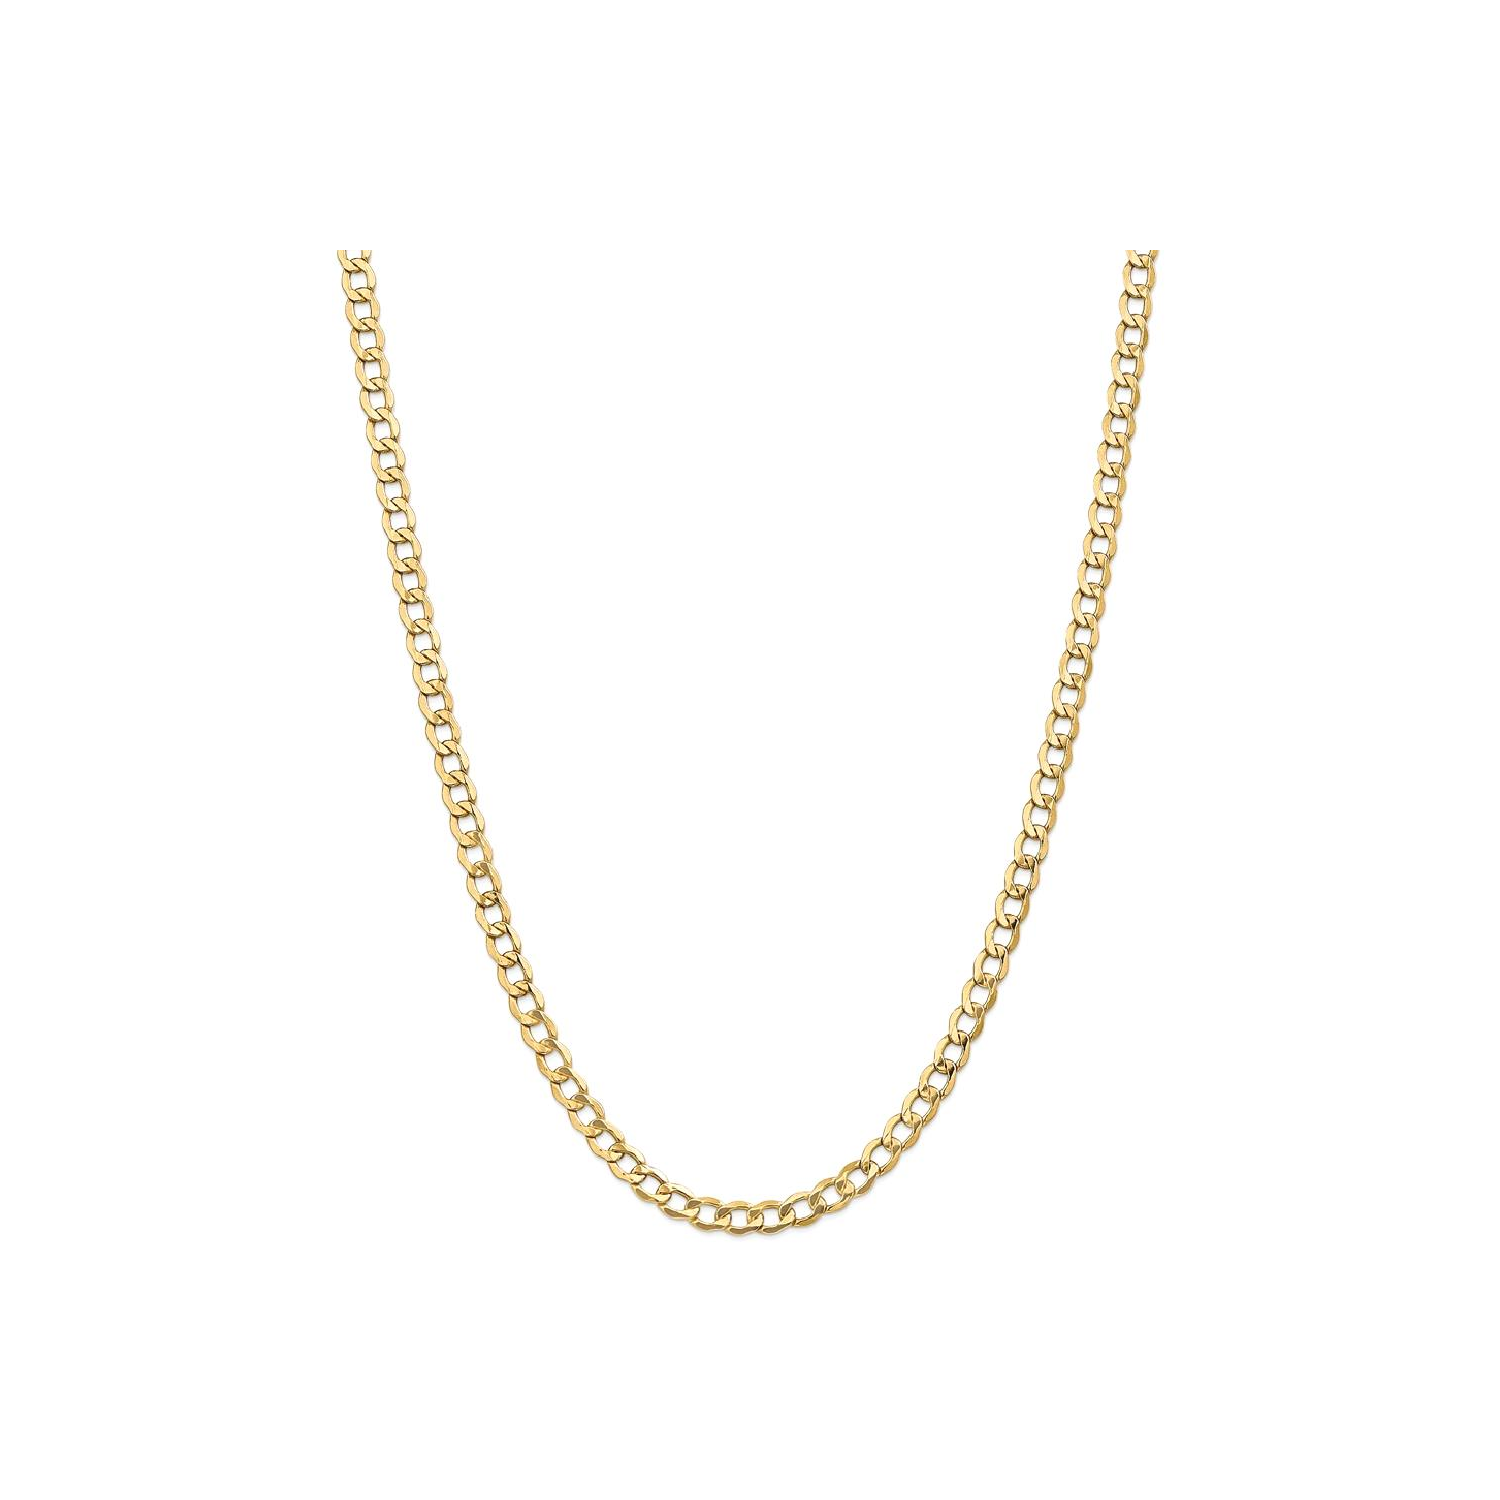 IceCarats 14k Yellow Gold 5.25mm Curb Cuban Link Chain Necklace 20 Inch